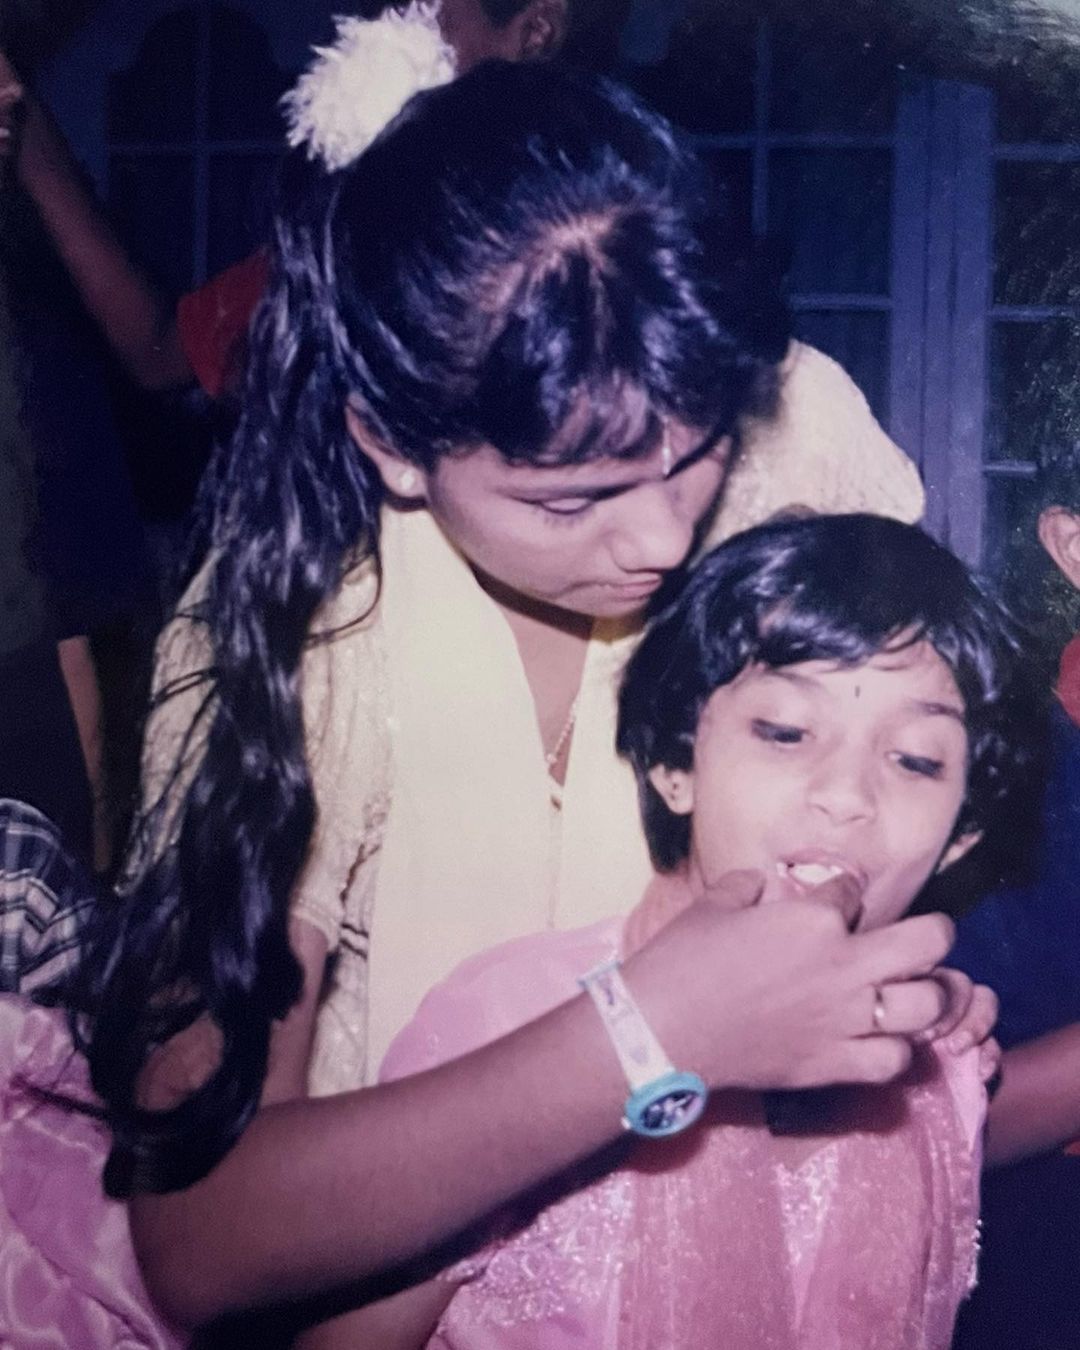 South Indian Actress Keerthy Suresh Childhood Pic with Elder Sister Revathy Suresh | South Indian Actress Keerthy Suresh Childhood Photos | Real-Life Photos